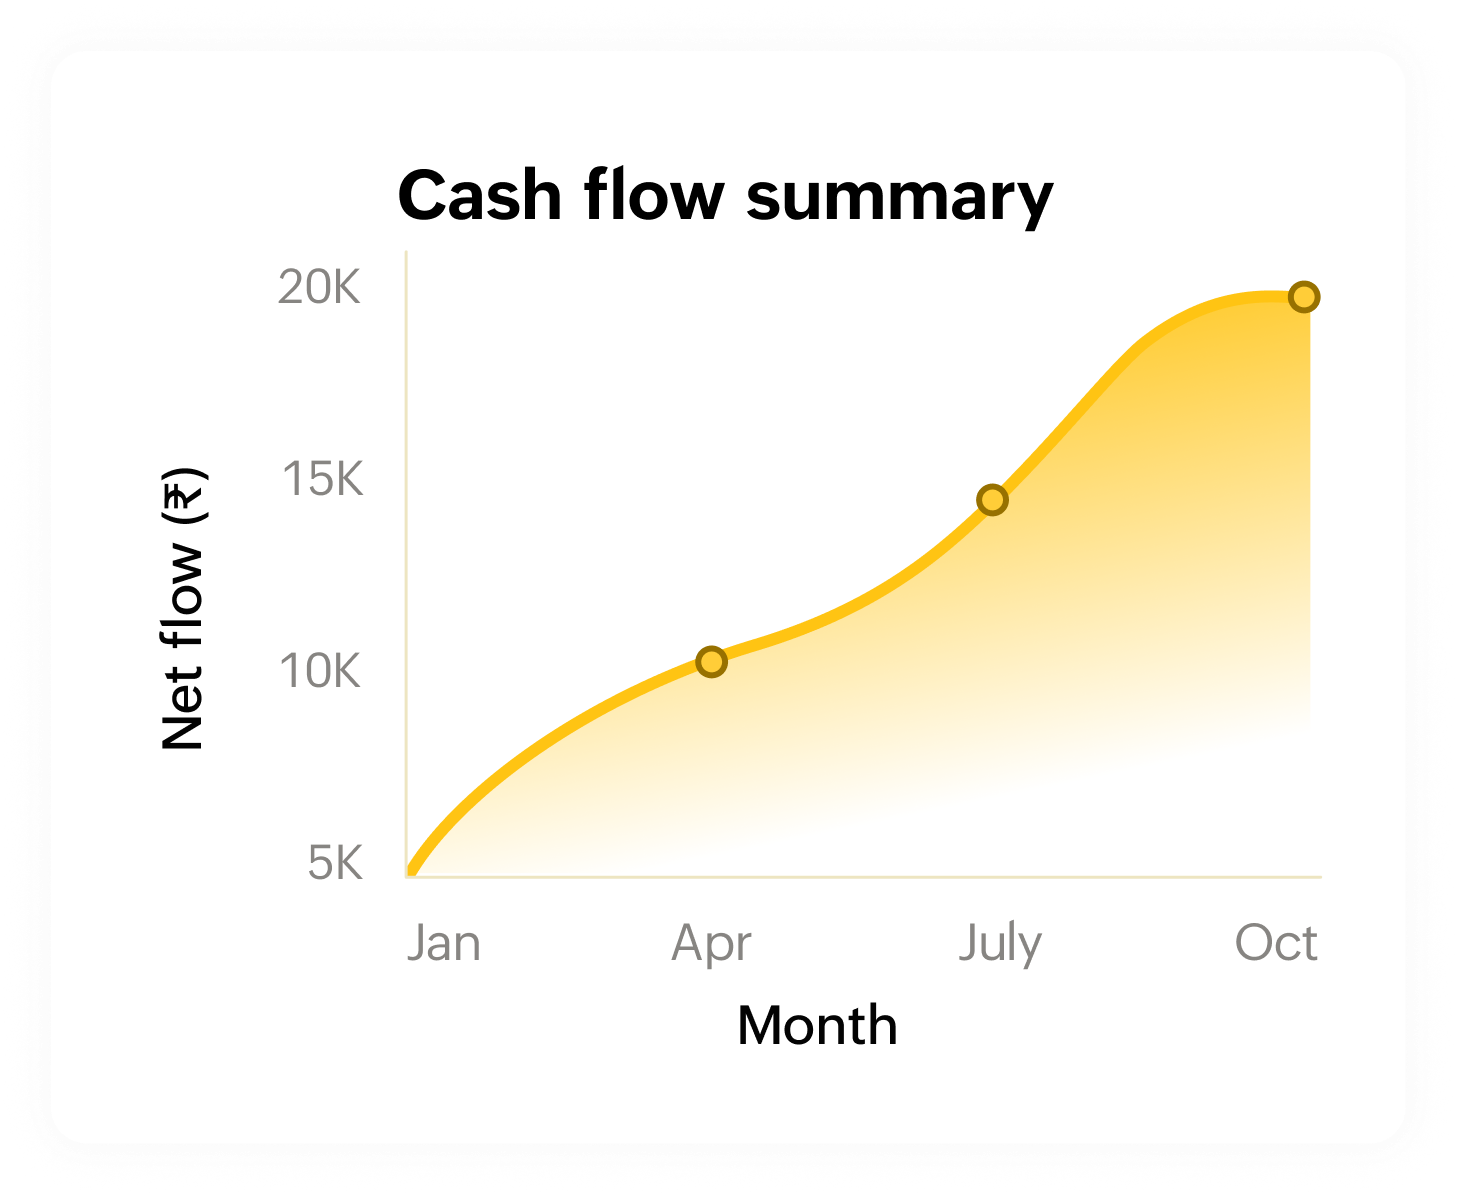 Fund and cash flow analysis in distribution ERP